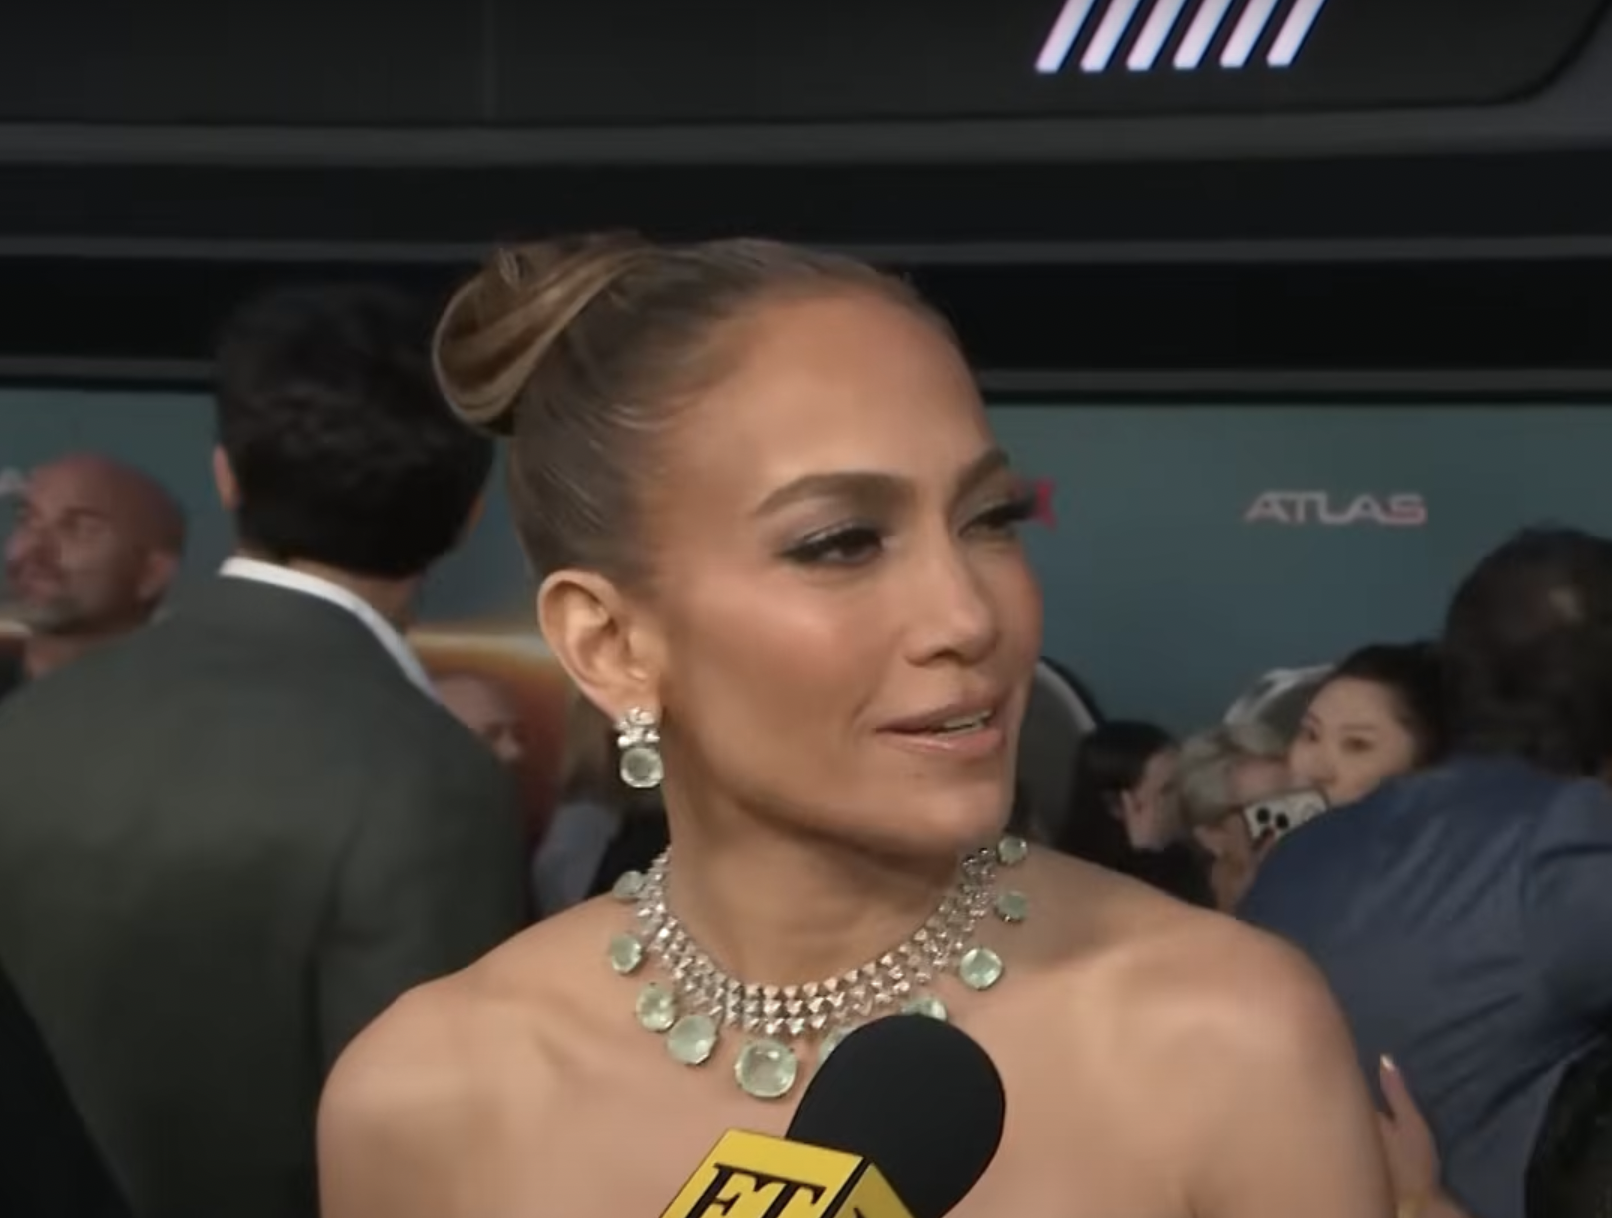 J Lo Has 5 Word Response After Reporter Asks Her If She’s Getting Divorced